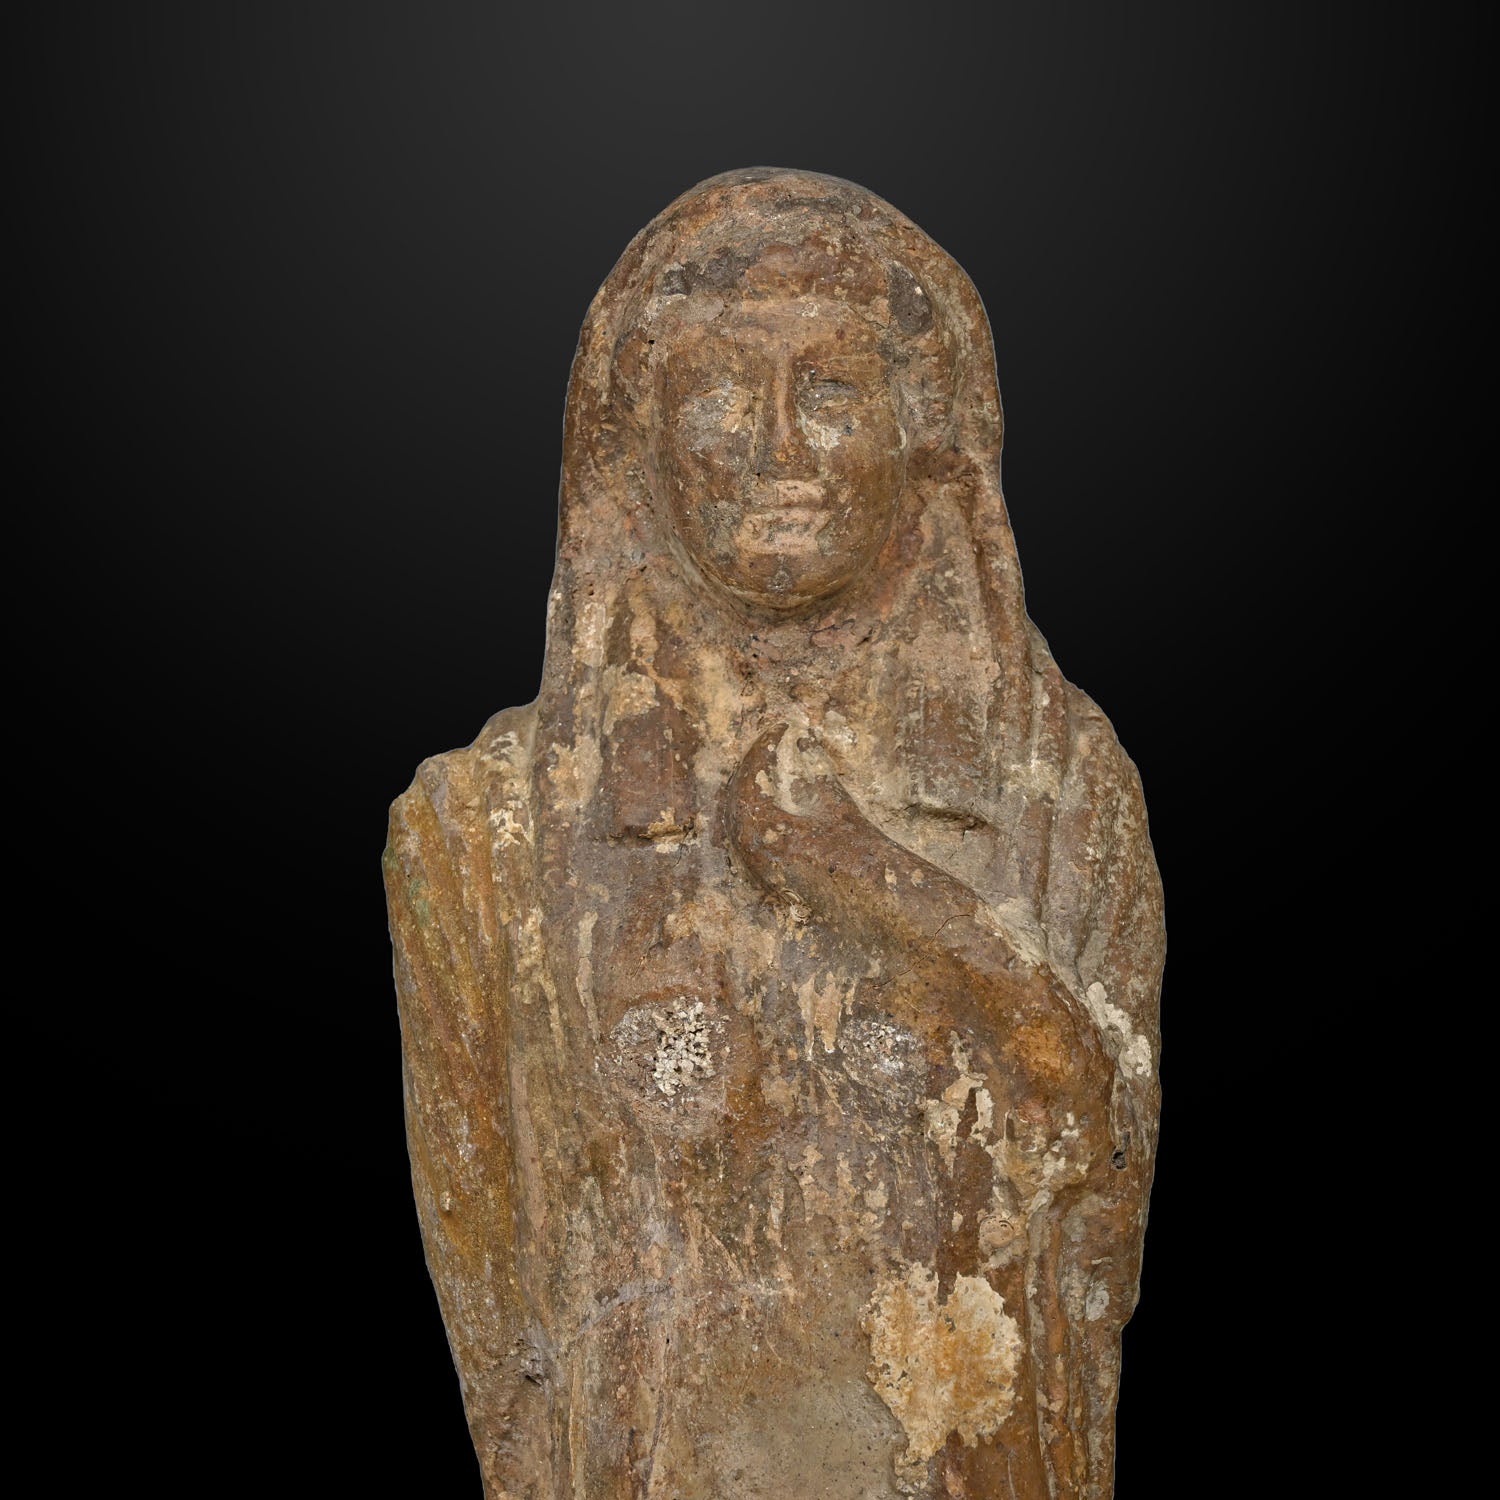 A large Carthaginian Terracotta Sculpture of the Goddess Tanit, a, ca. 5th century BCE